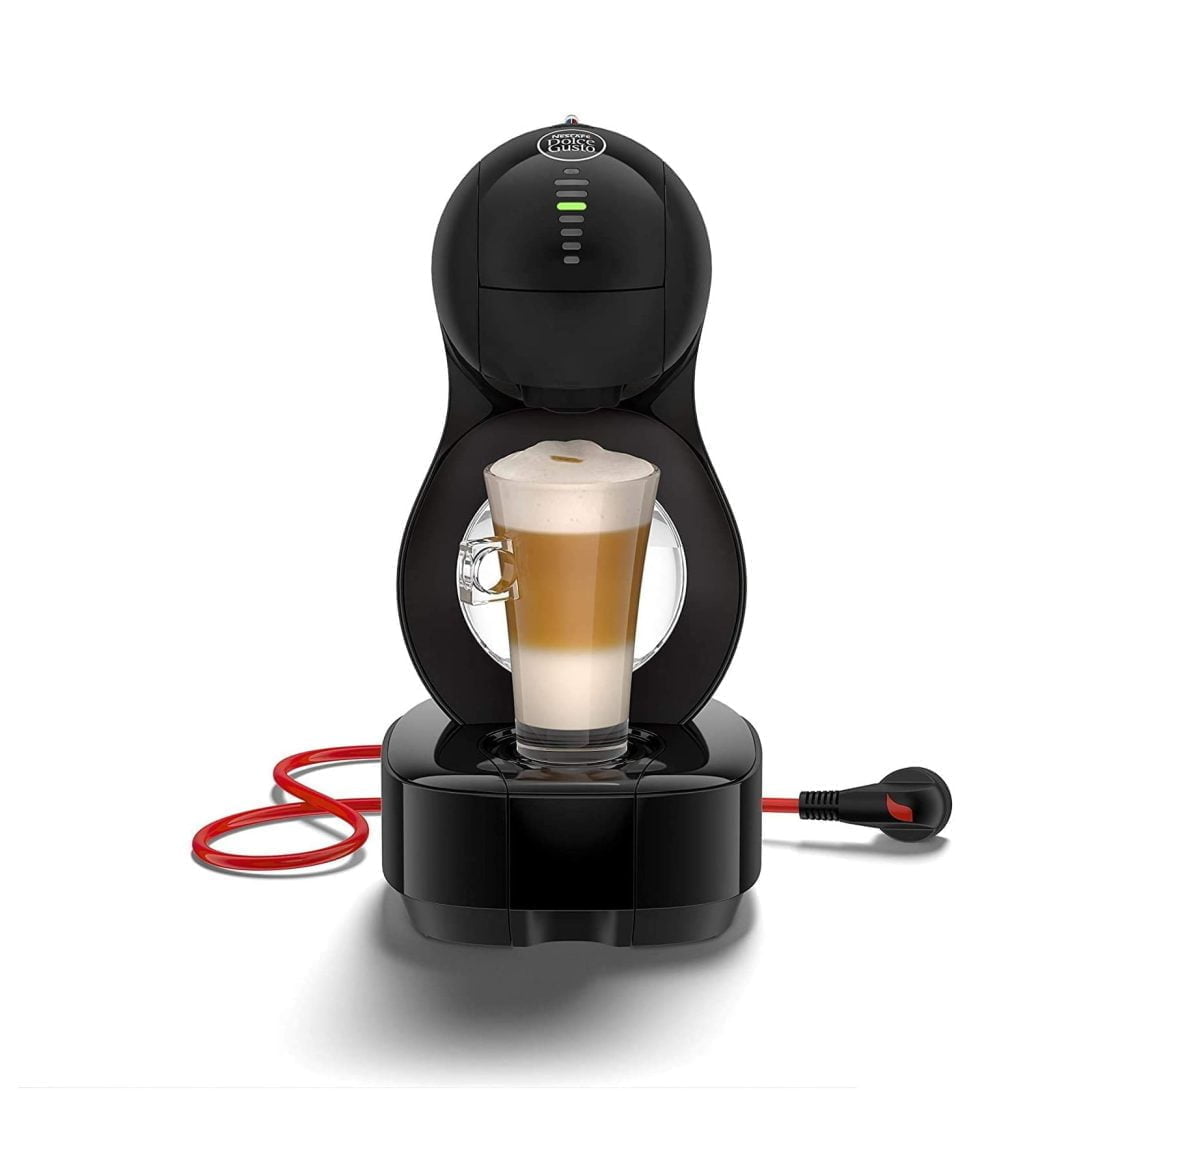 Nescafe &Lt;H1 Id=&Quot;Title&Quot; Class=&Quot;A-Size-Large A-Spacing-None&Quot;&Gt;&Lt;Span Id=&Quot;Producttitle&Quot; Class=&Quot;A-Size-Large Product-Title-Word-Break&Quot;&Gt; Dolce Gusto Lumio Black Coffee Machine Black, Nescafe Dolce Gusto, Dg0132180893-B&Lt;/Span&Gt;&Lt;/H1&Gt; Https://Www.youtube.com/Watch?V=Dy0Jxtpu64Q &Lt;Ul Class=&Quot;A-Unordered-List A-Vertical A-Spacing-Mini&Quot;&Gt; &Lt;Li&Gt;&Lt;Span Class=&Quot;A-List-Item&Quot;&Gt; From Frothy Latte Macchiatos, Delicious Cappuccinos And Smooth Americanos. With Over 16 Different Varieties In Our Range, There Is Plenty More For You To Enjoy. &Lt;/Span&Gt;&Lt;/Li&Gt; &Lt;Li&Gt;&Lt;Span Class=&Quot;A-List-Item&Quot;&Gt; 15 Bar - 1500 Watt - 50 To 60 Hertz - 220 To 240 Volts&Lt;/Span&Gt;&Lt;/Li&Gt; &Lt;Li&Gt;&Lt;Span Class=&Quot;A-List-Item&Quot;&Gt; Dolce Gusto Lumio Black &Lt;/Span&Gt;&Lt;/Li&Gt; &Lt;Li&Gt;&Lt;Span Class=&Quot;A-List-Item&Quot;&Gt; Brand Name : Nescafe Dolce Gusto&Lt;/Span&Gt;&Lt;/Li&Gt; &Lt;/Ul&Gt; Nescafe Dolce Gusto Lumio Black Coffee Machine Black, Nescafe Dolce Gusto, Dg0132180893-B